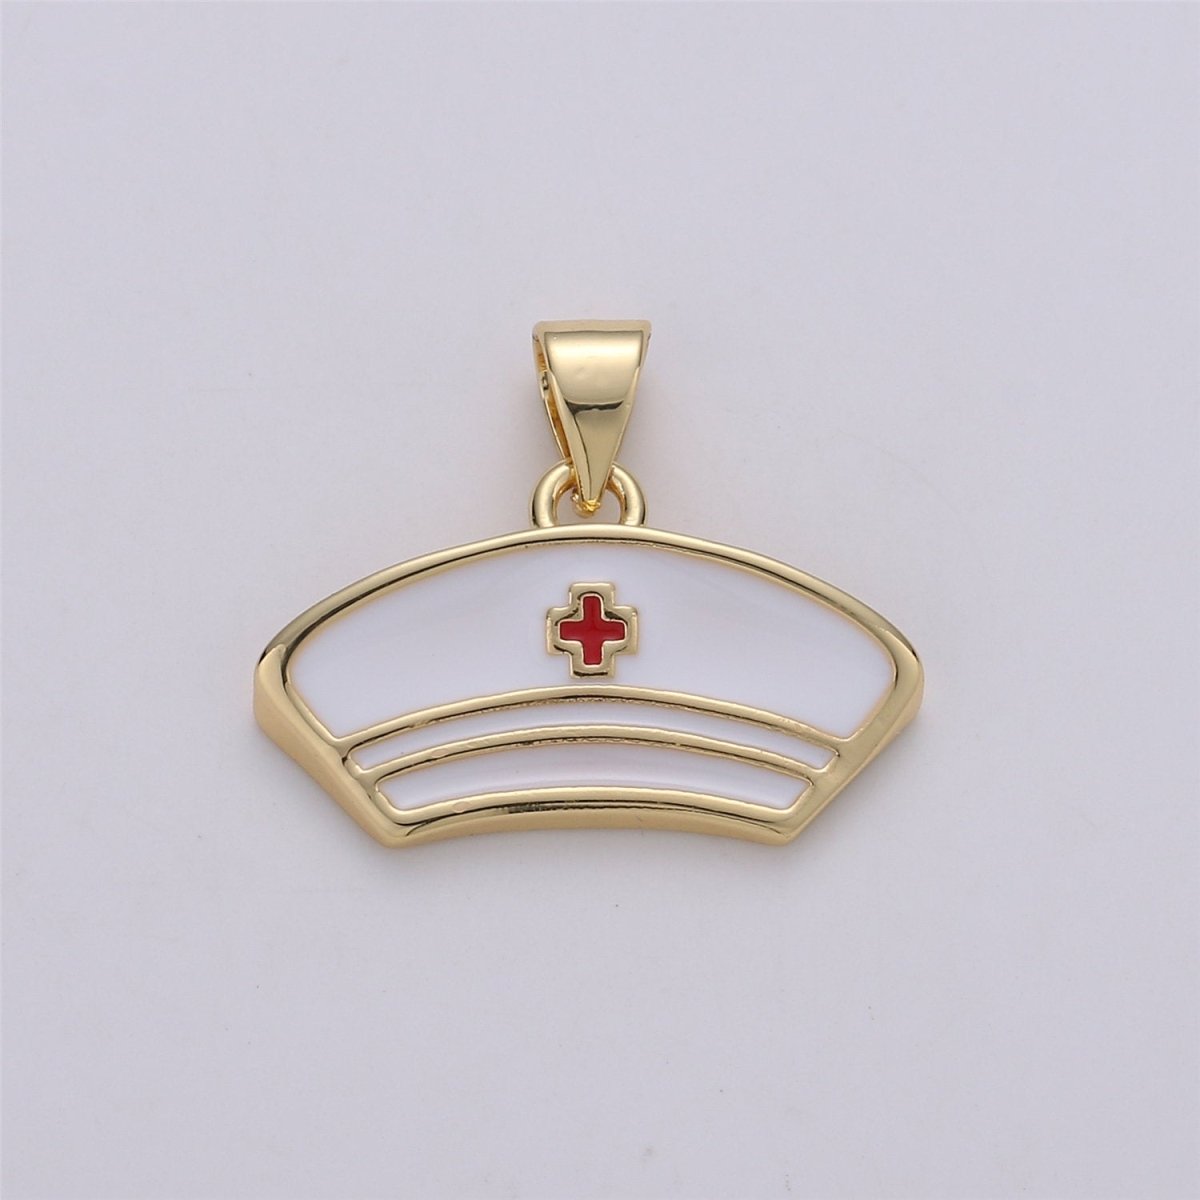 14k Gold Filled Nurse Charm Nurse Hospital First Responder Jewelry, Thank you gift for Nurse, Doctor RN Necklace Jewelry making supply I-571 - DLUXCA